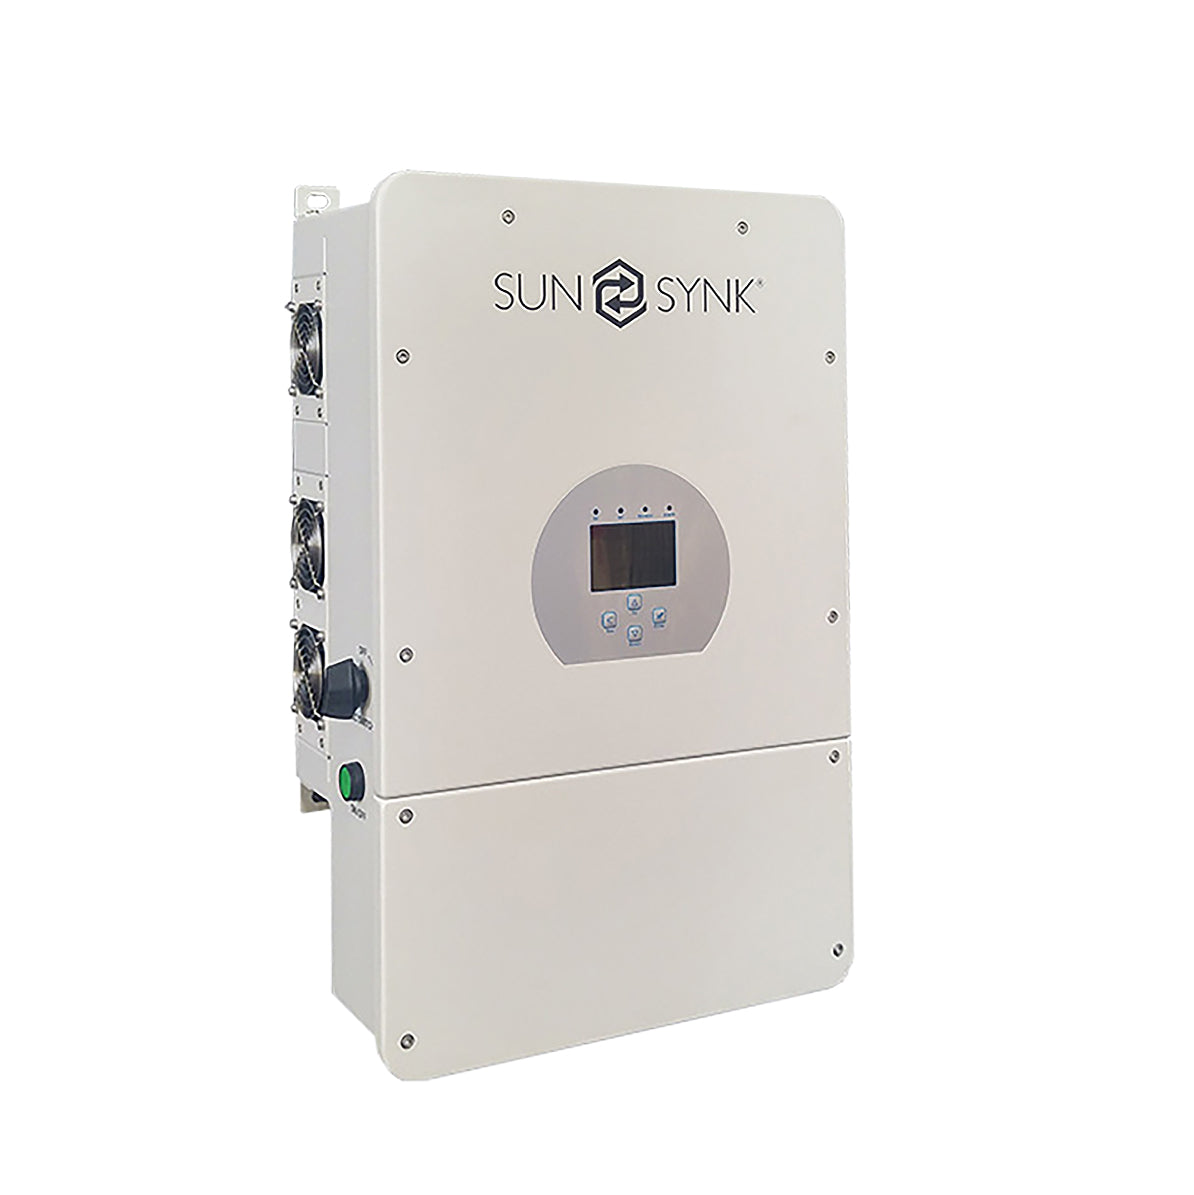 Special - 5kW Sunsynk and LNL Energy backup system